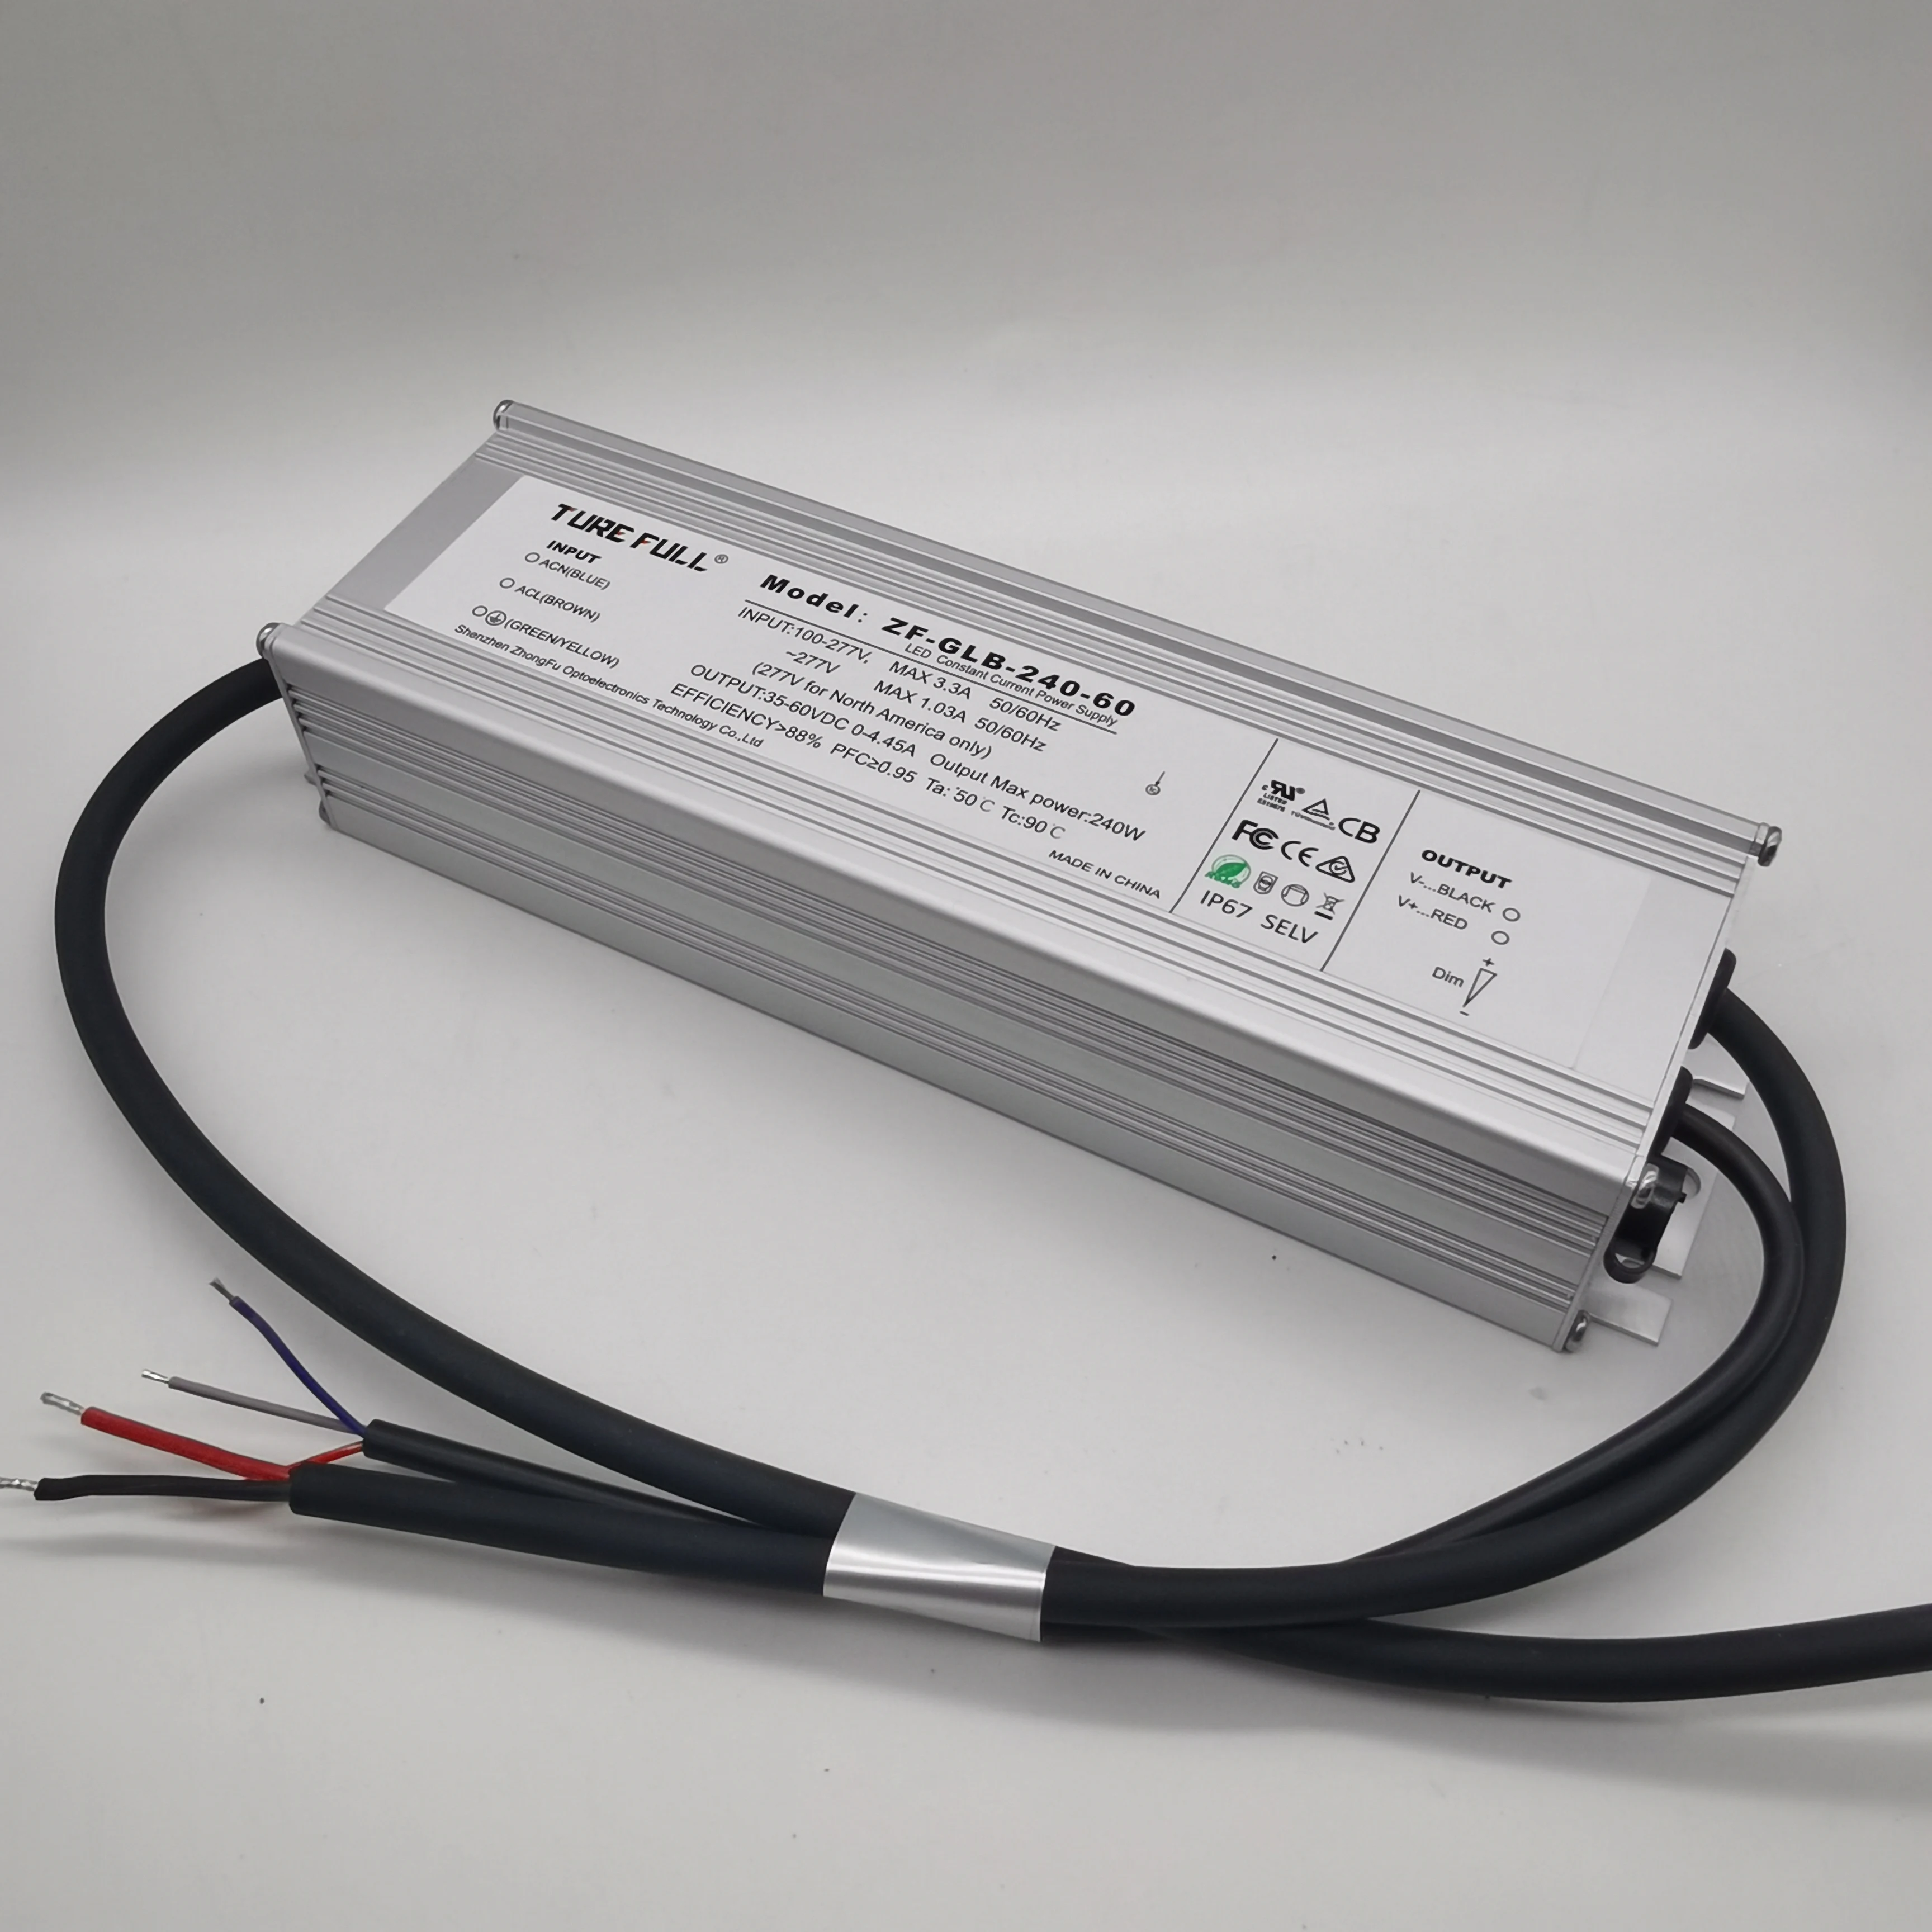 2021 New Wholesales Power Supply 48v 5a 240w Hl 240h 48b Led Power Supply Ip67 Waterproof Constant Current Led Dimmable Driver